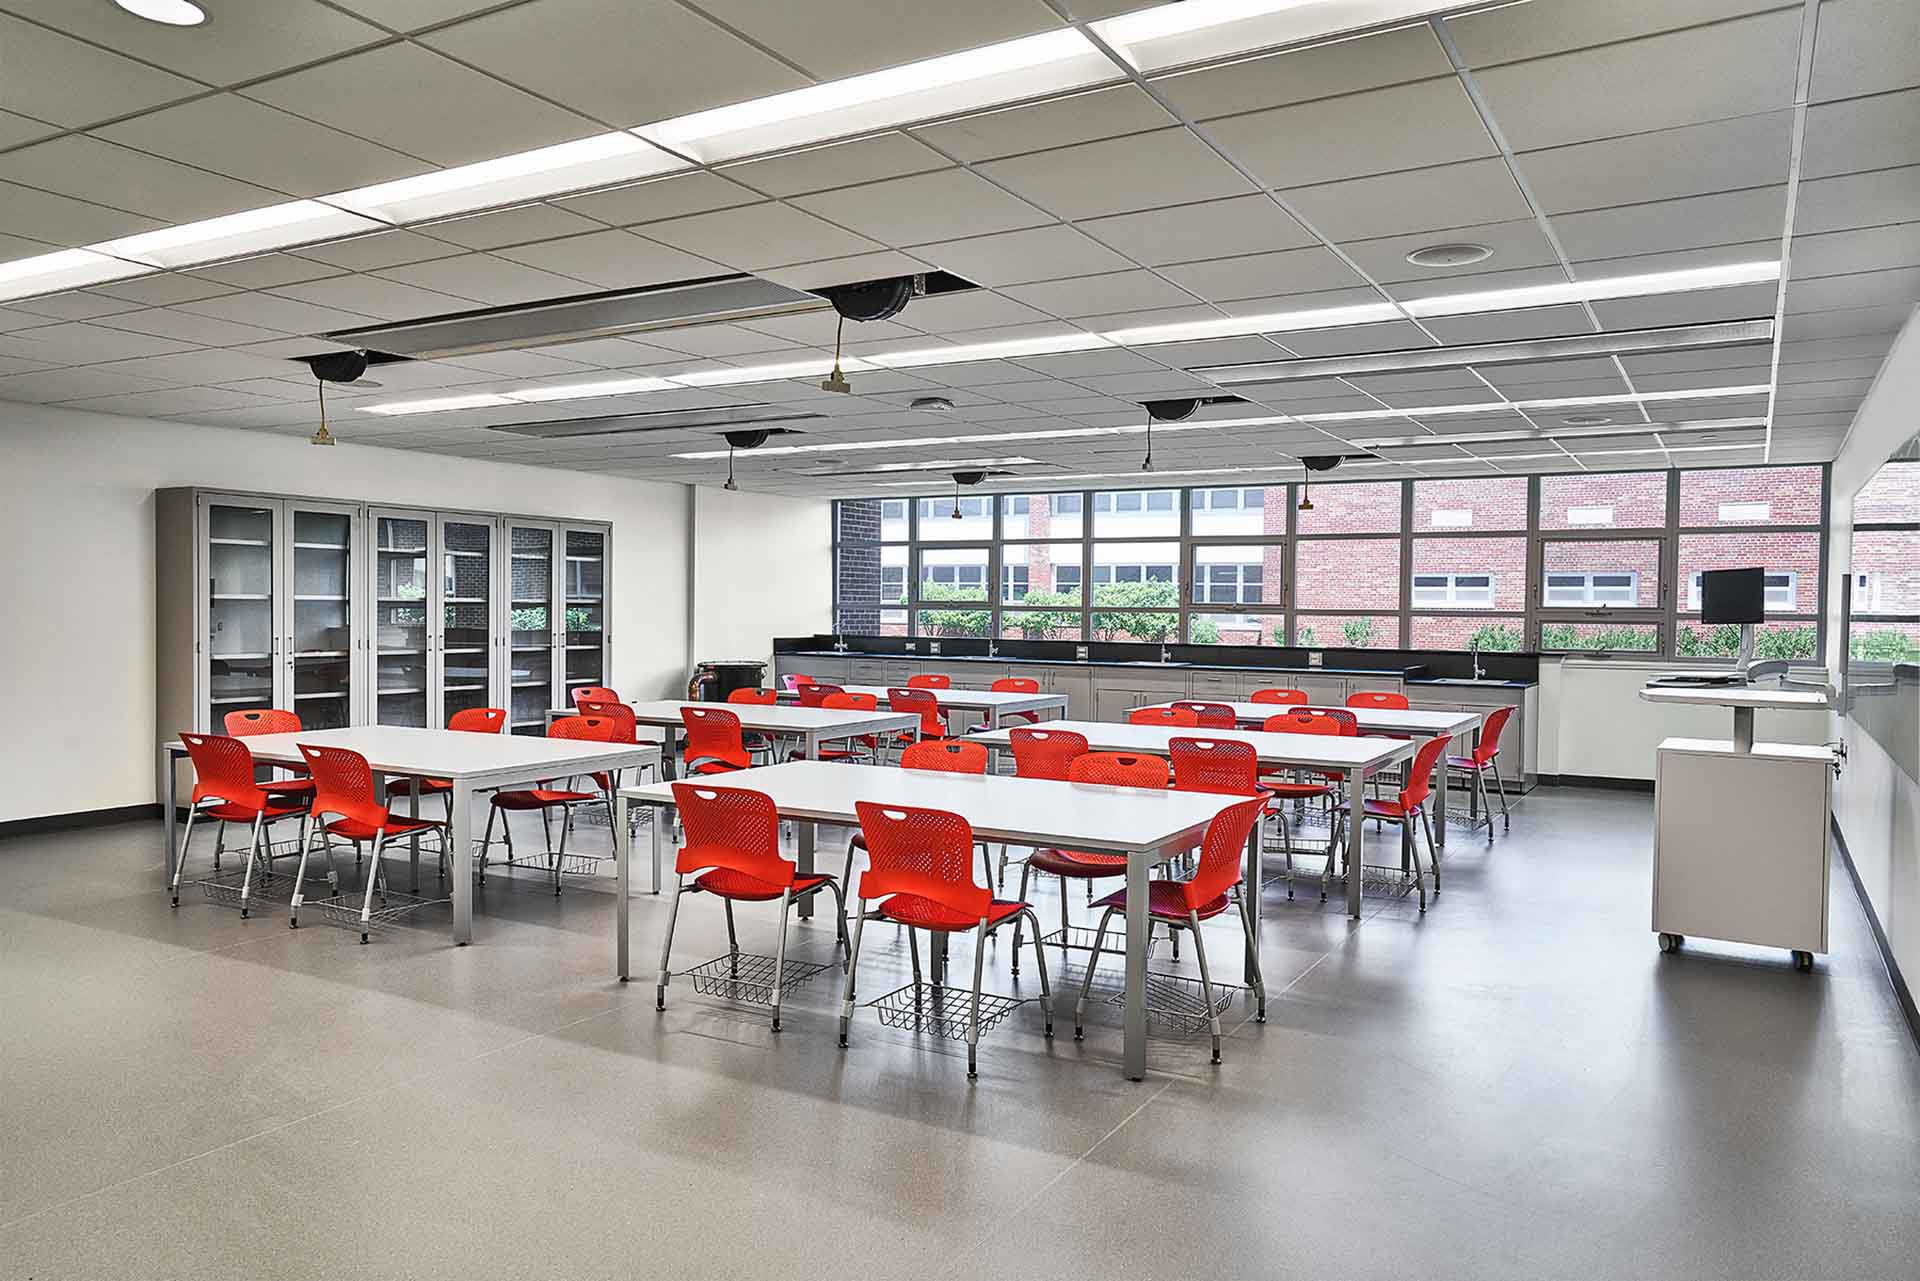 marist-science-wing-lab-with-red-chairs